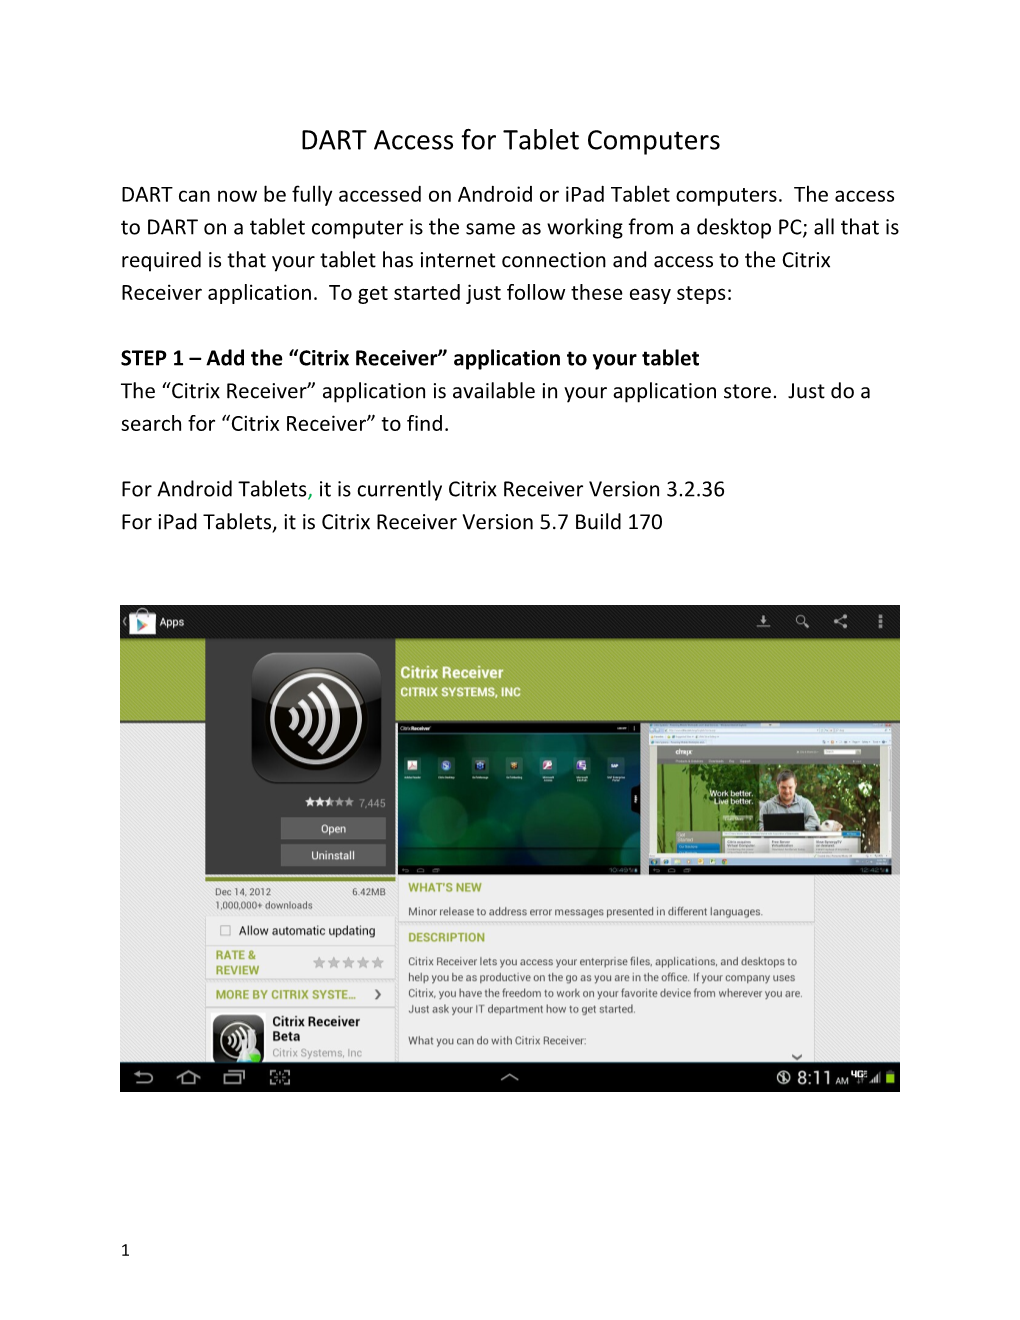 STEP 1 Add the Citrix Receiver Application to Your Tablet s1